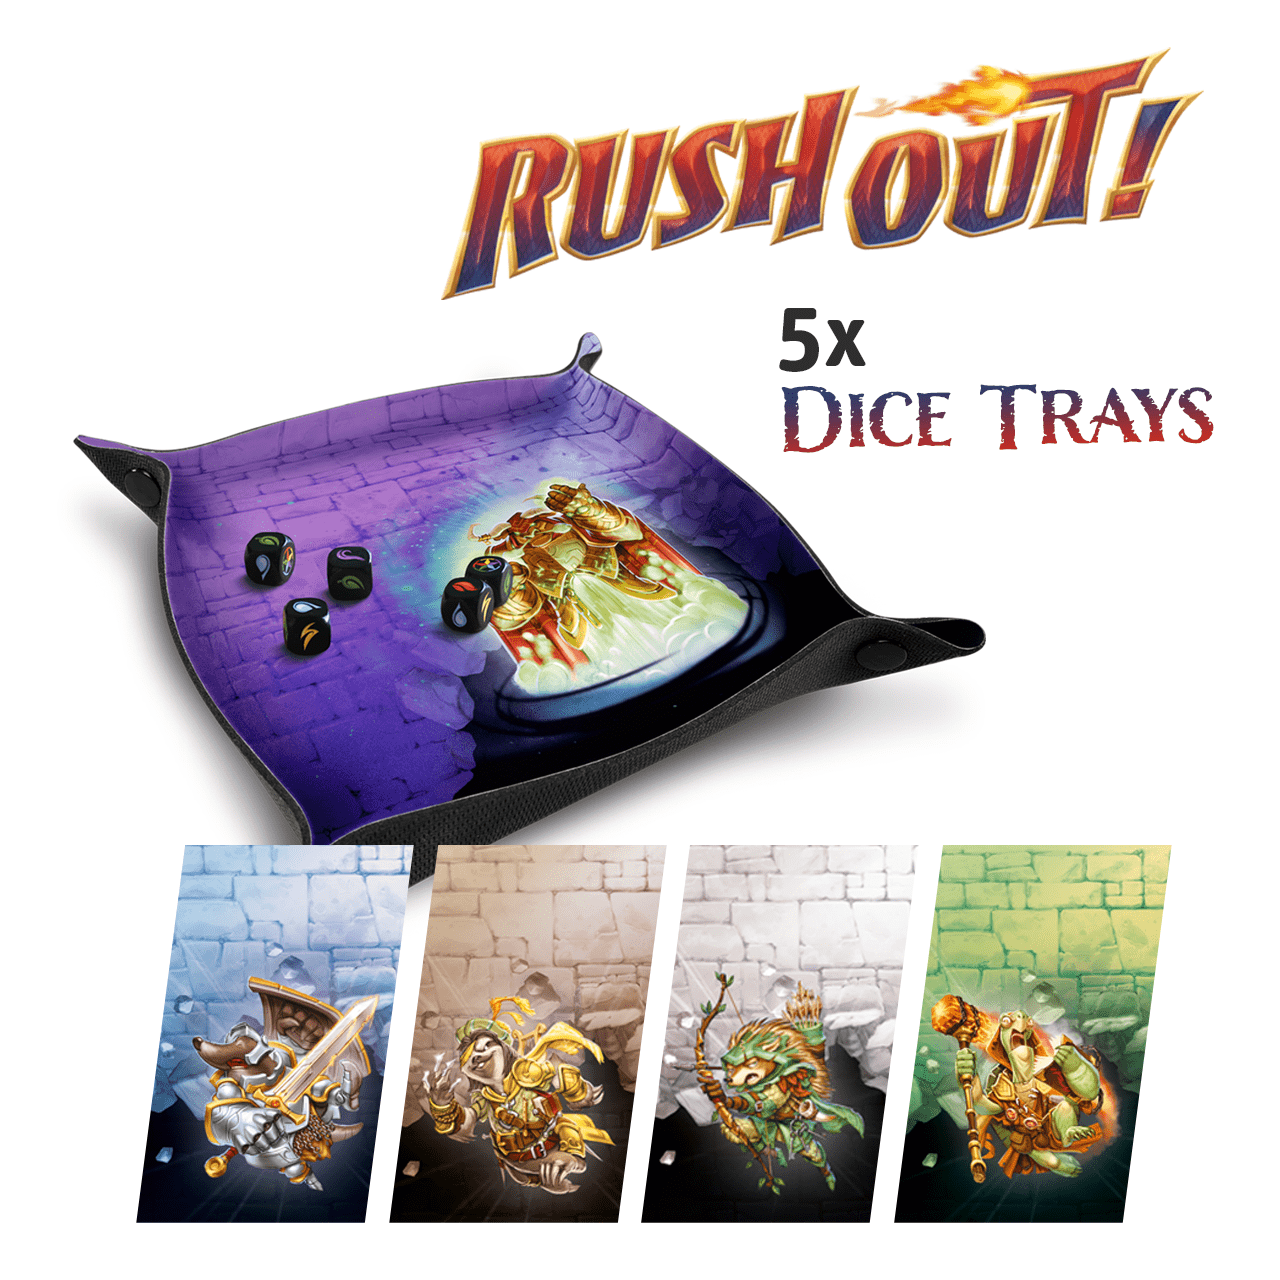 Dice Trays x5 – Rush Out!